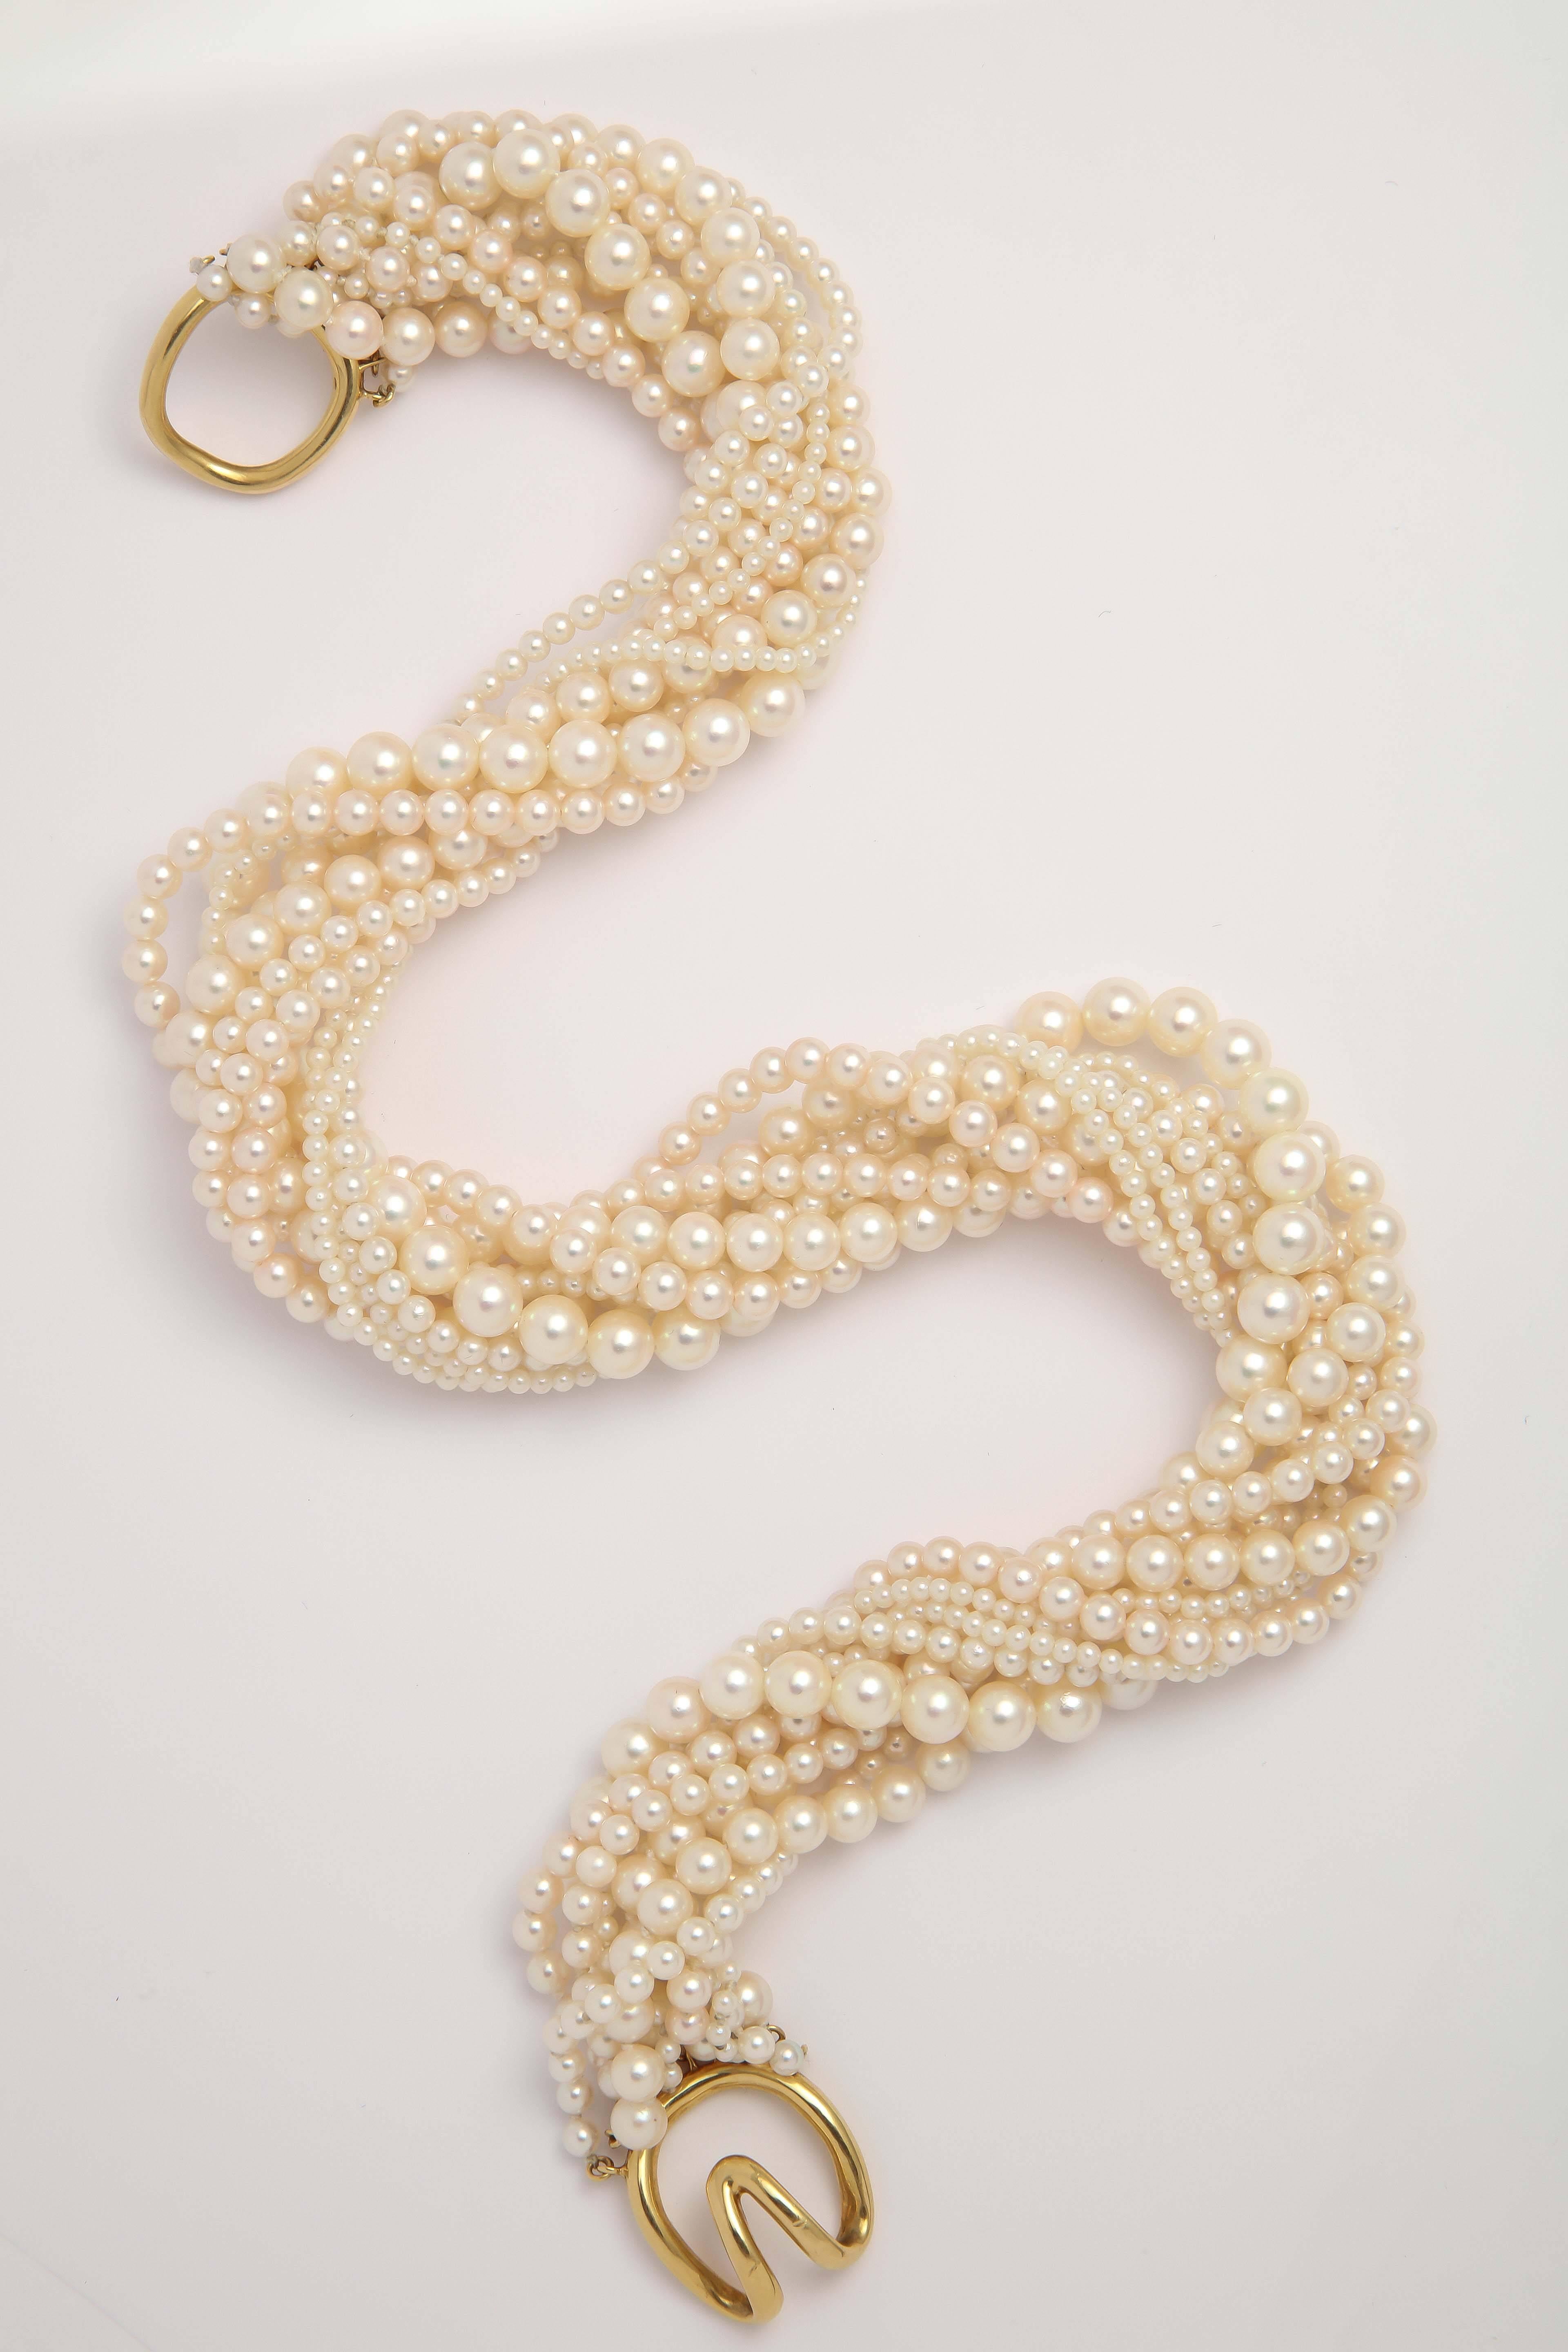 Torsade made up of 10 Strands of cultured Pearls with 18kt Yellow Gold Clasp.
Signed Tiffany & Co.
